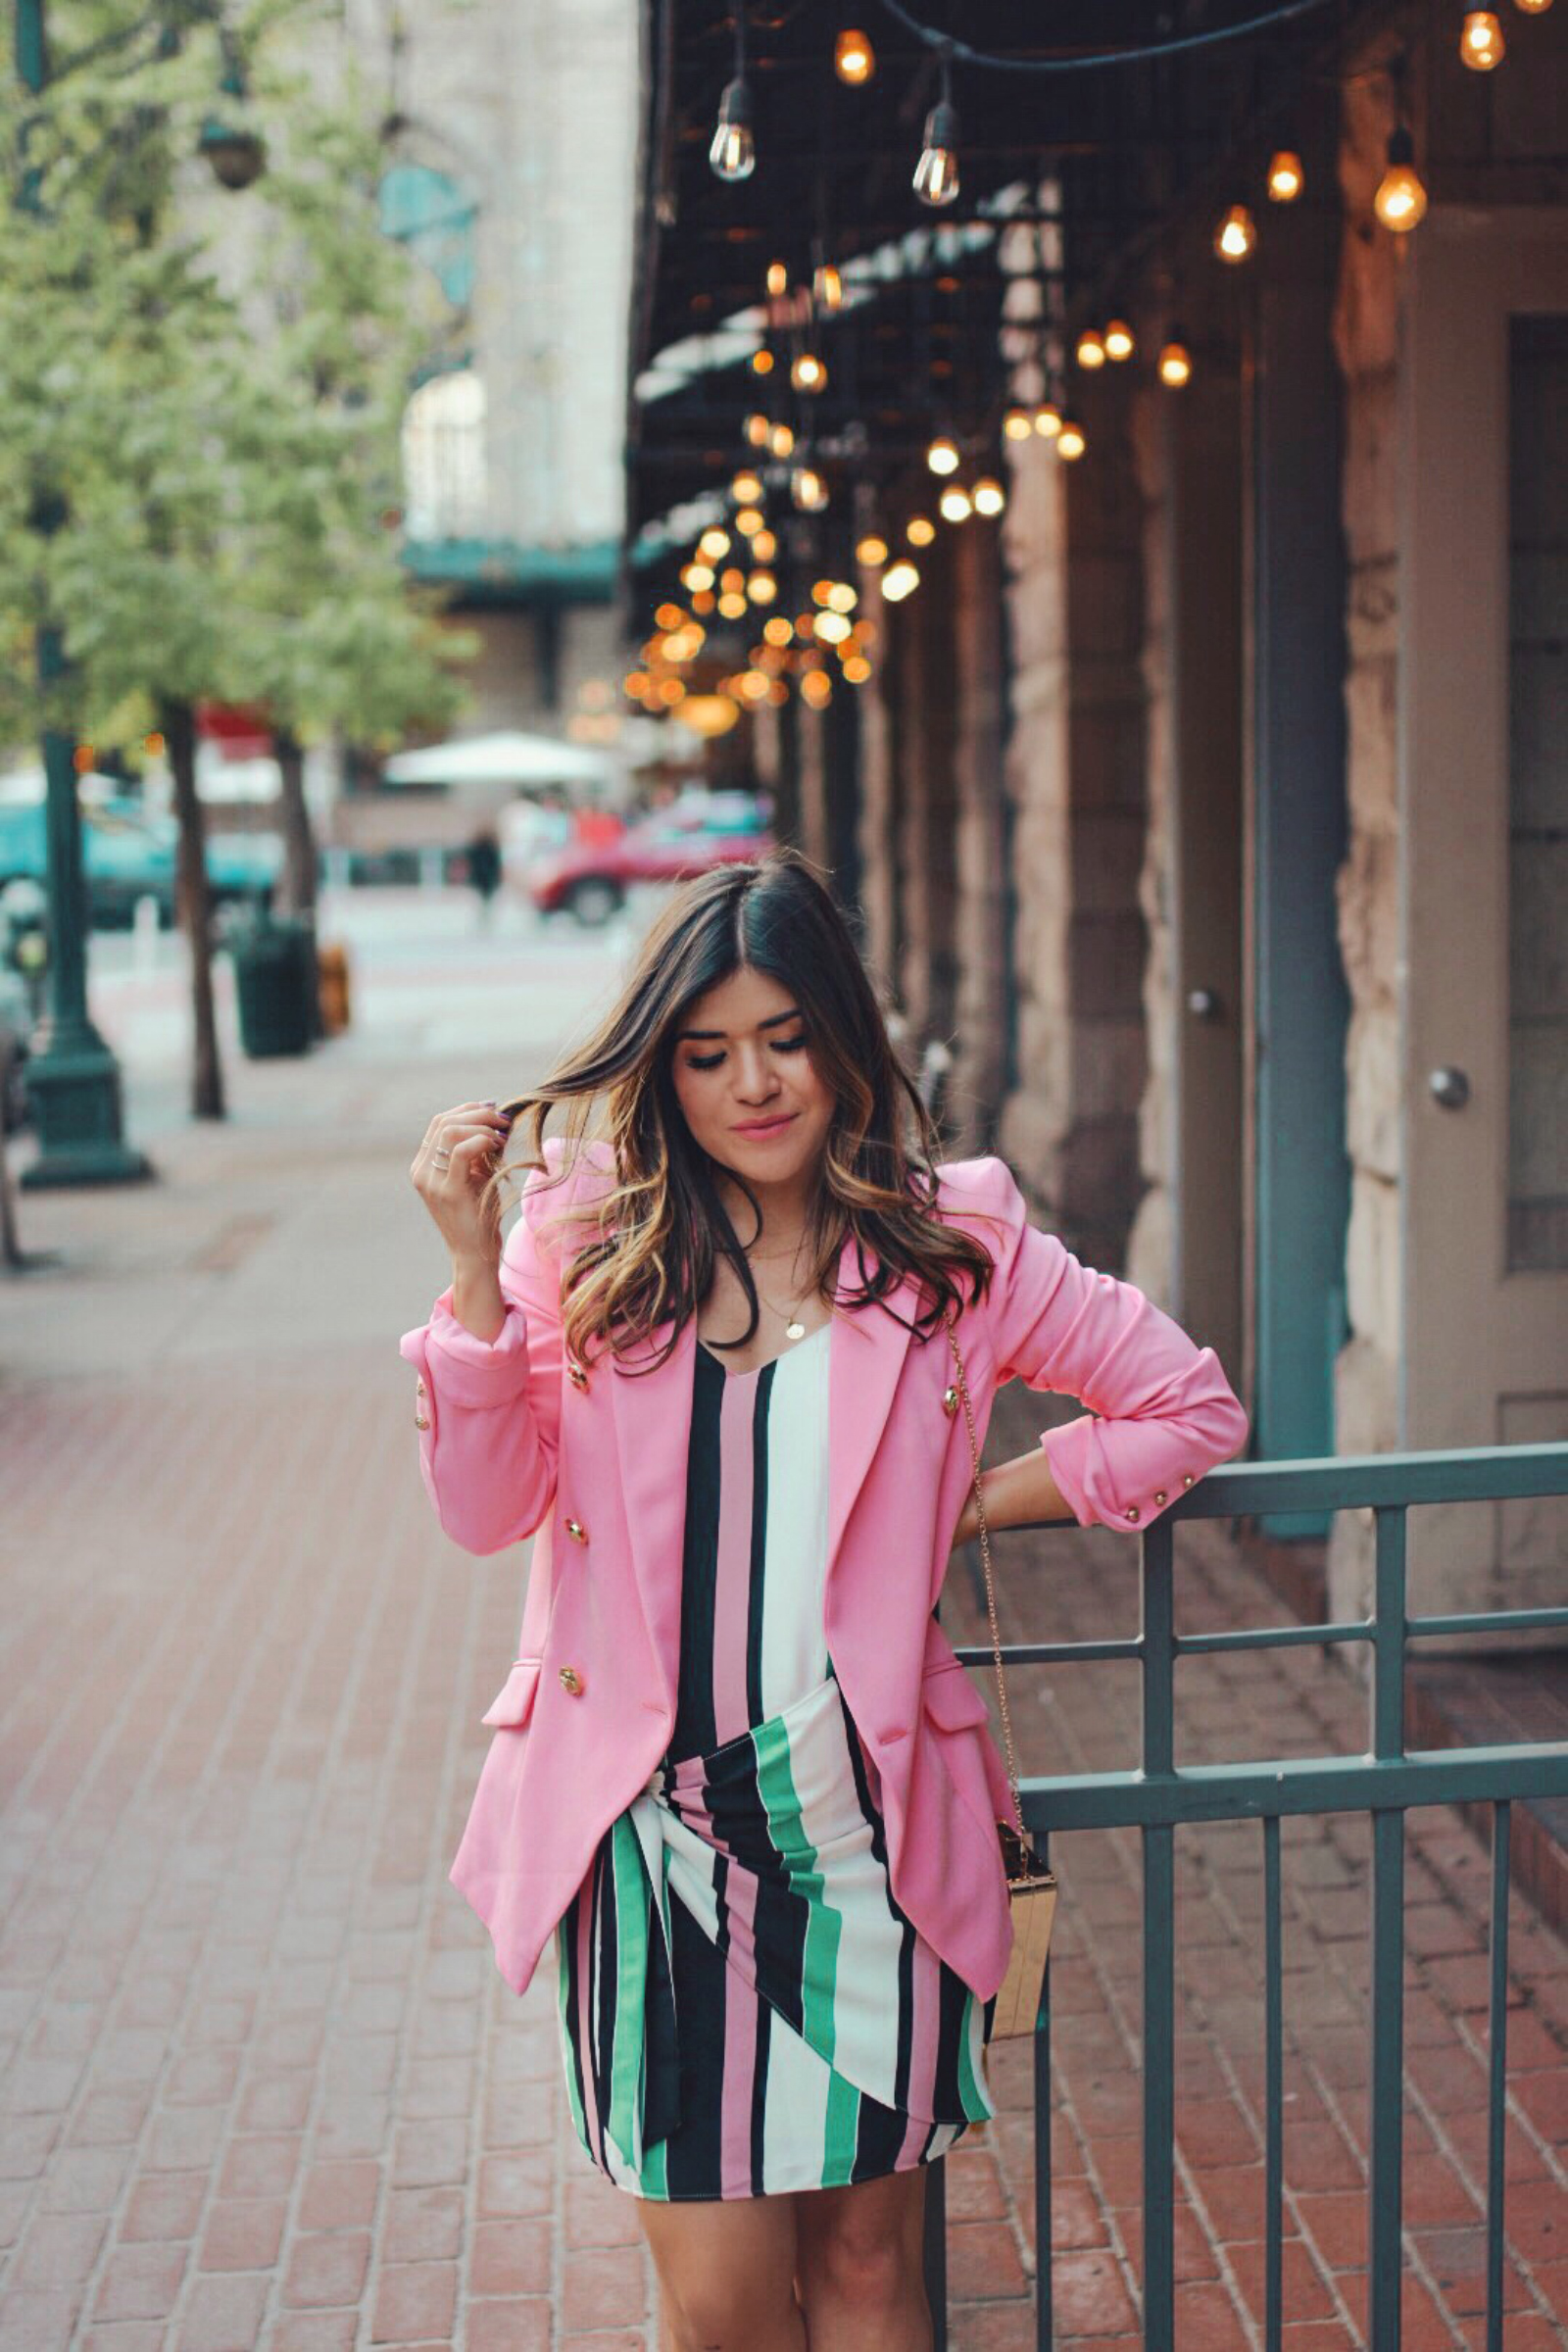 Carolina Hellal of Chic Talk wearing a River Island prink blazer, striped dress and green embellished clutch - THE ULTIMATE SPRING SHOPPING GUIDE by popular Denver fashion blogger, Chic Talk